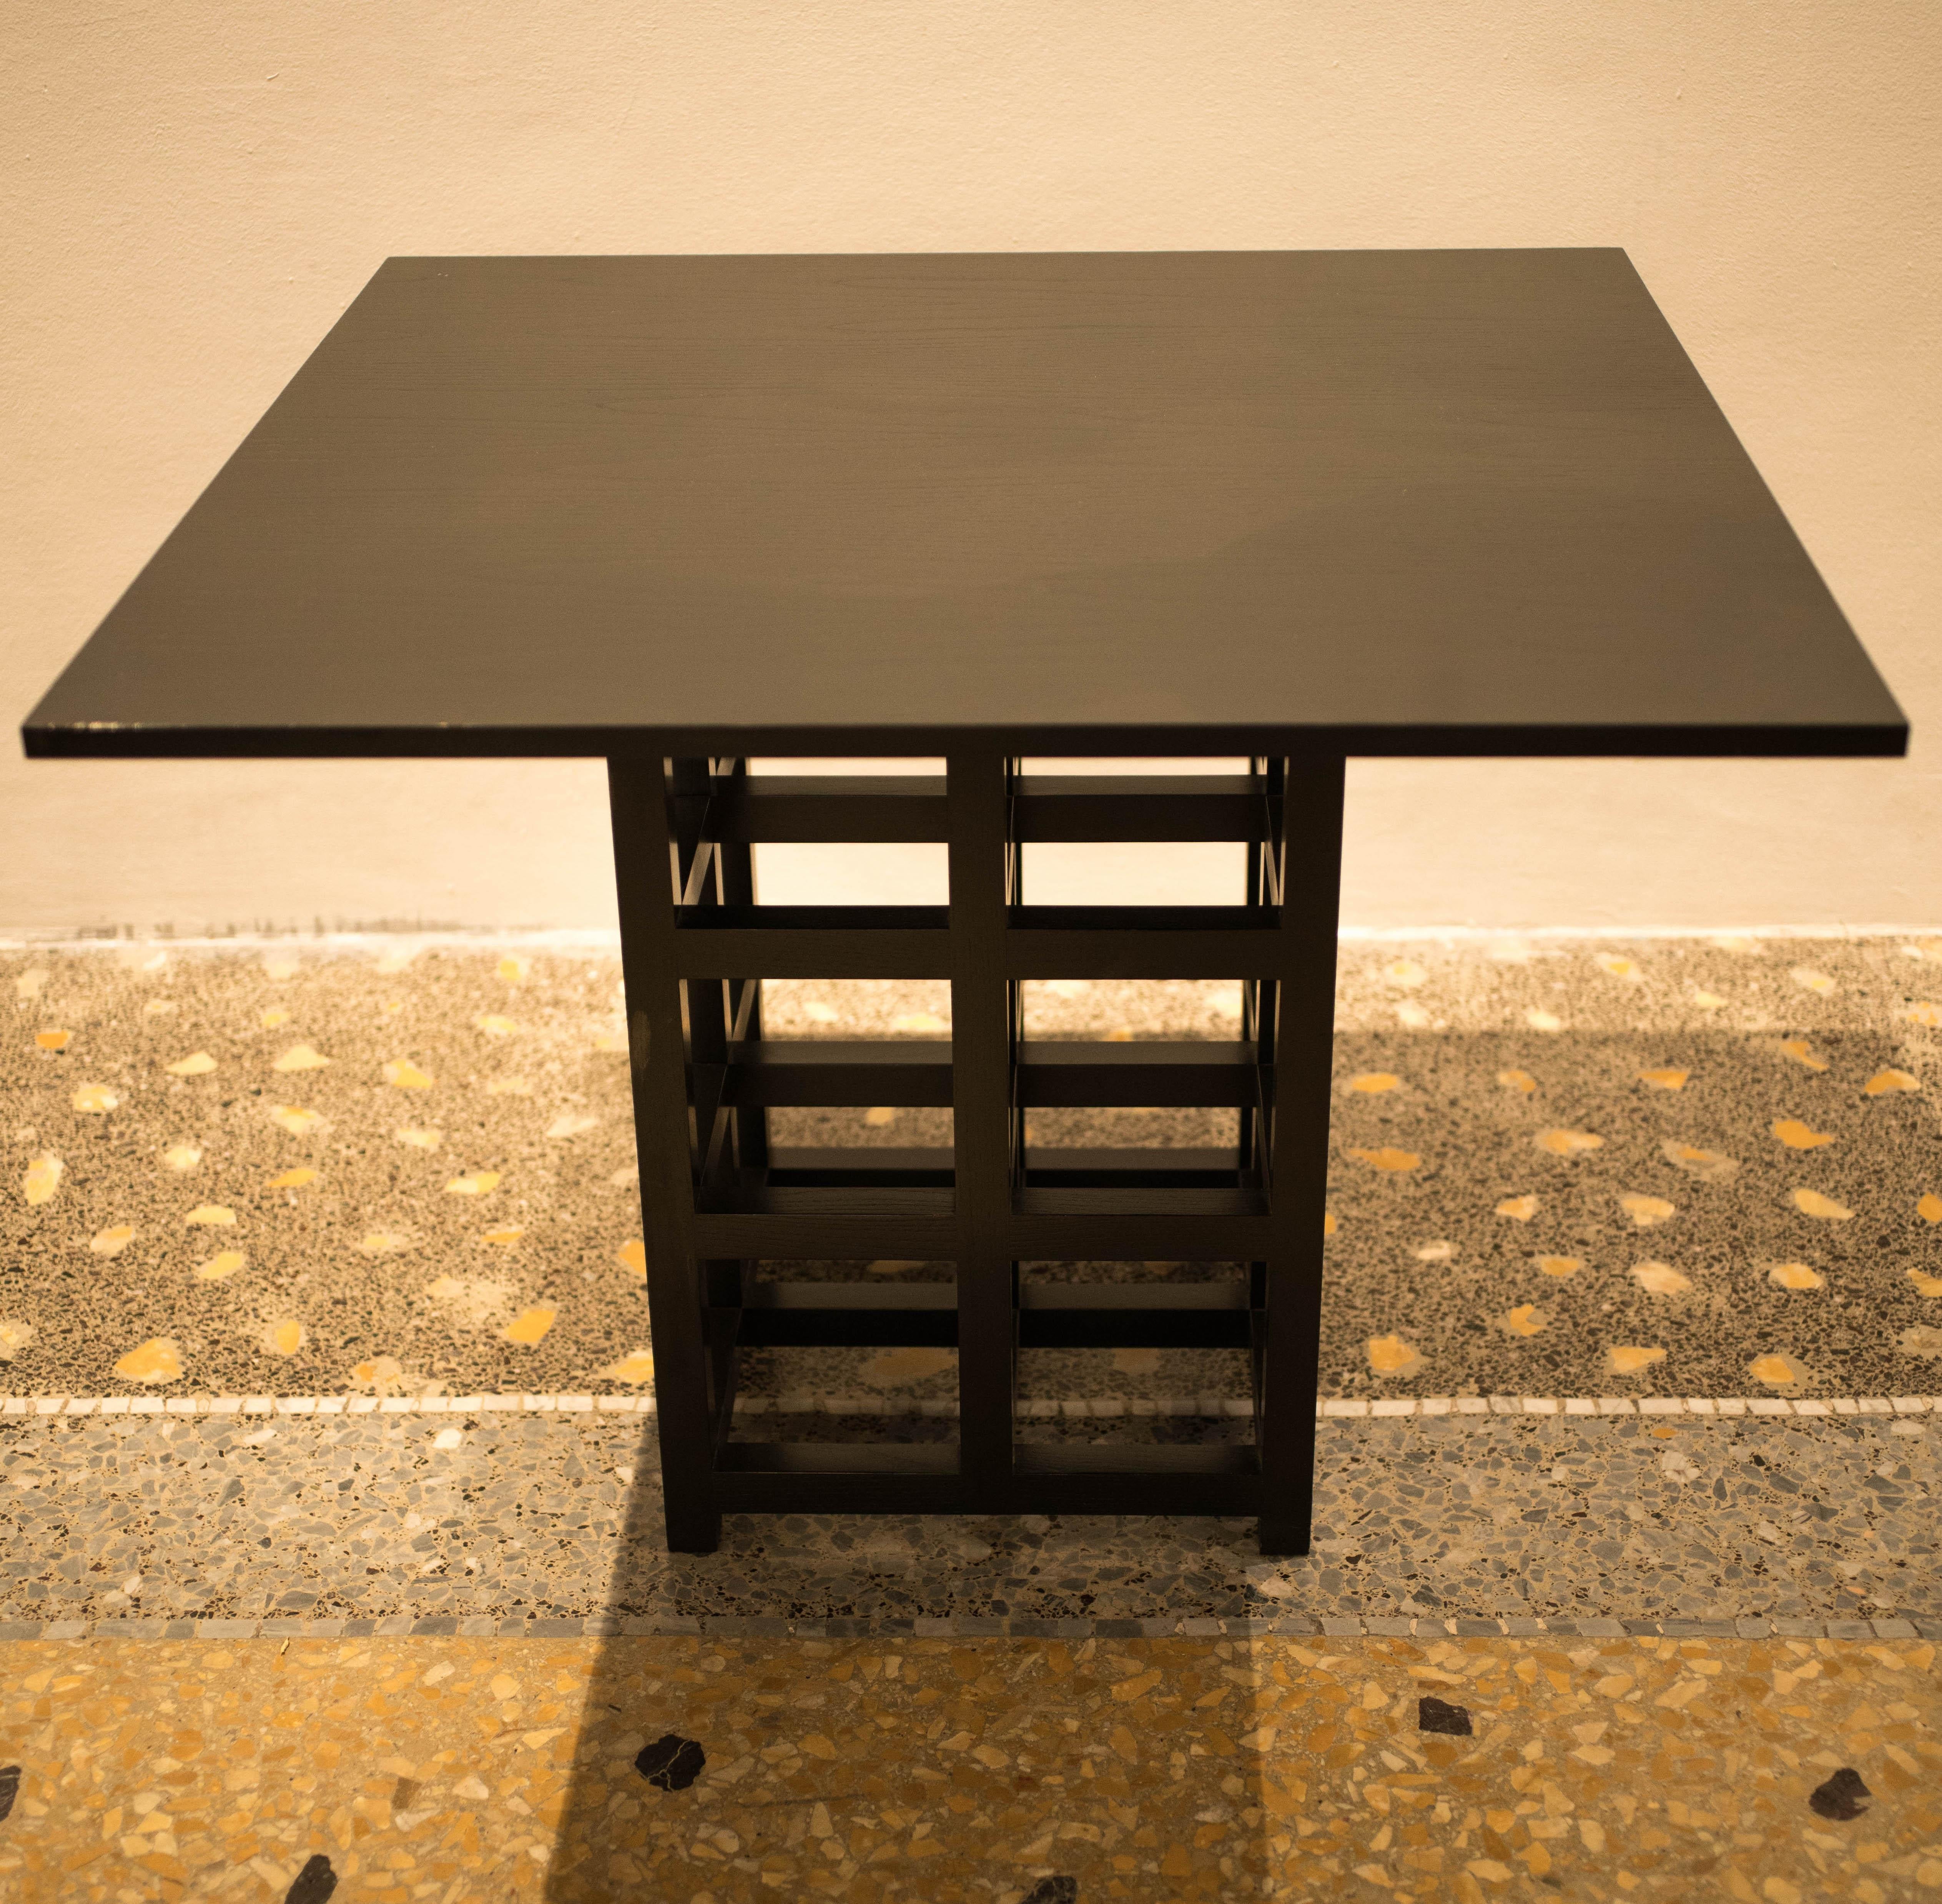 This DS2 Mackintosh table is an elegant table designed by Charles Rennie Mackintosh (1868-1928) and realized by the Italian designer furniture Cassina ?in 1980s.

Made in Italy.

Dimensions: cm 100 x 100 (tabletop) x 78 (height) x 50